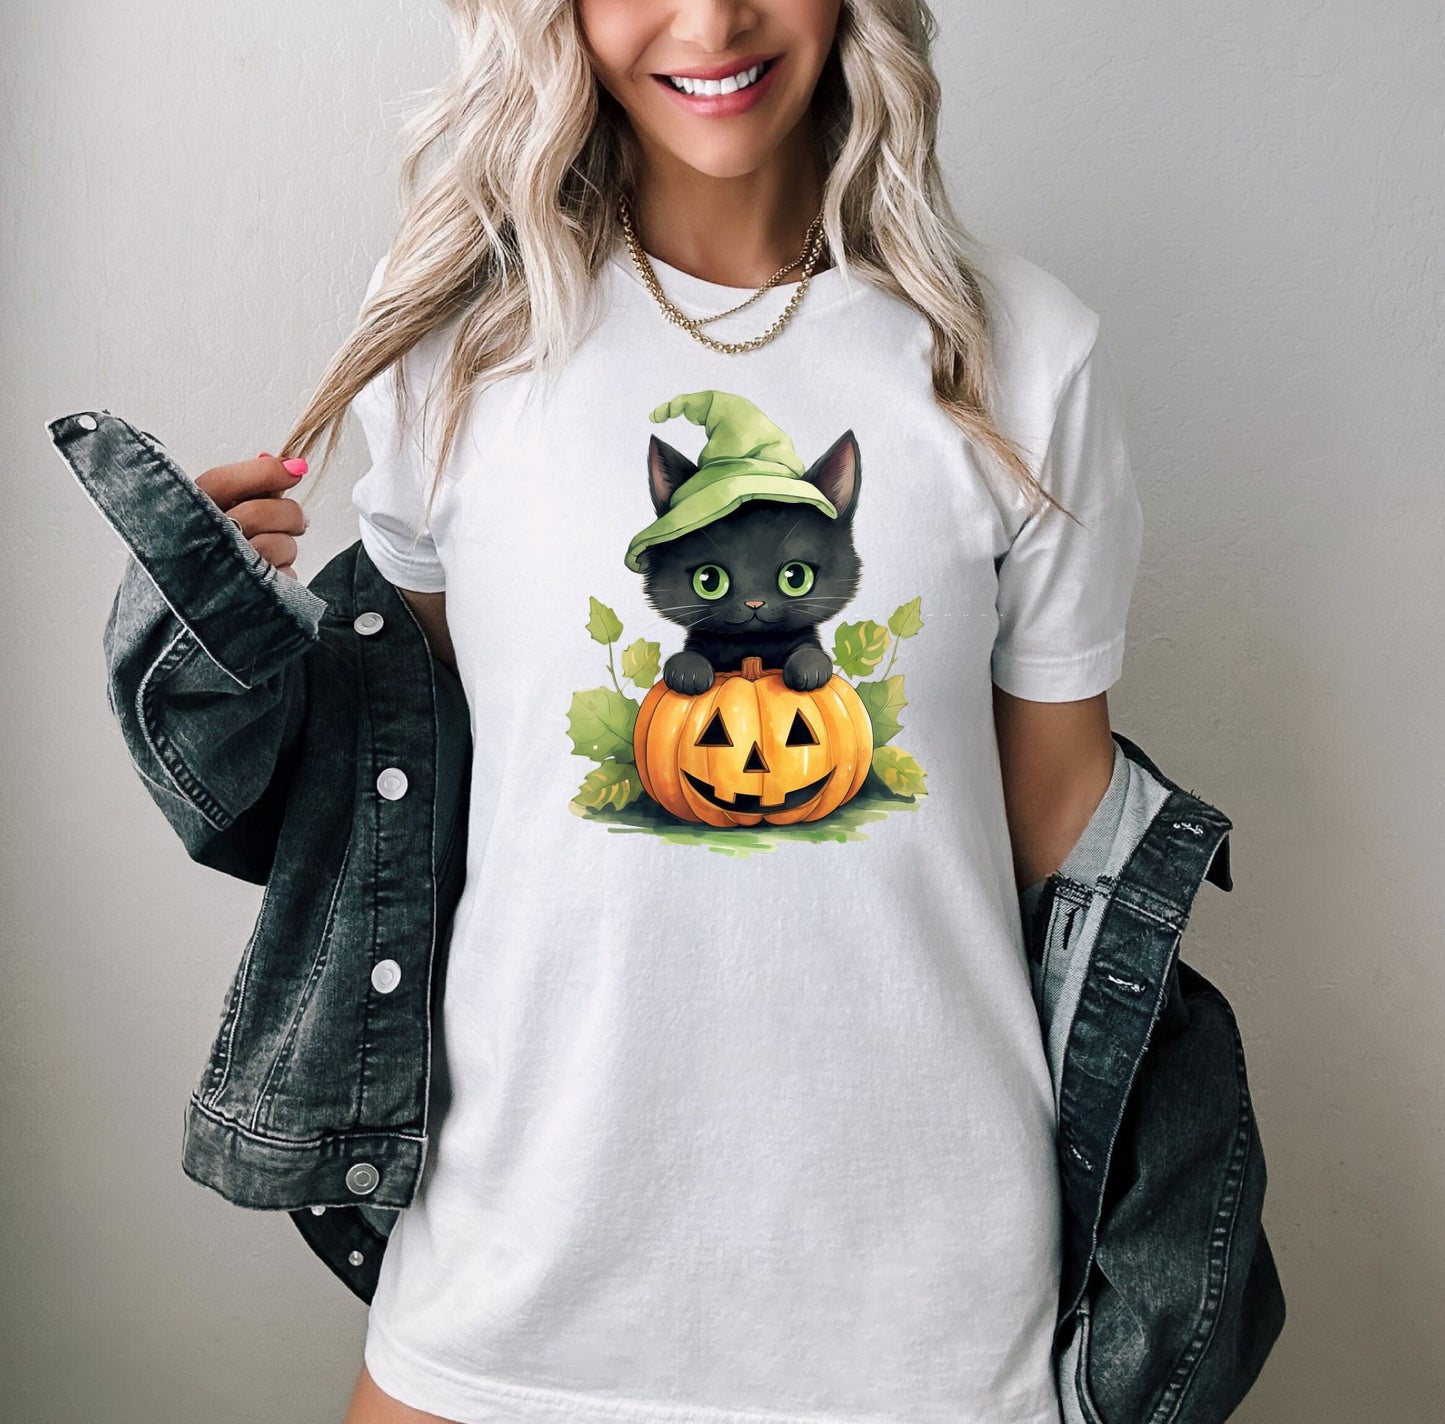 Halloween forest leaf Black Cat Shirt, Cat Wants To Play Shirt, Cute Black Cat with Pumpkins shirt, Halloween Witches forest Black Cat Shirt